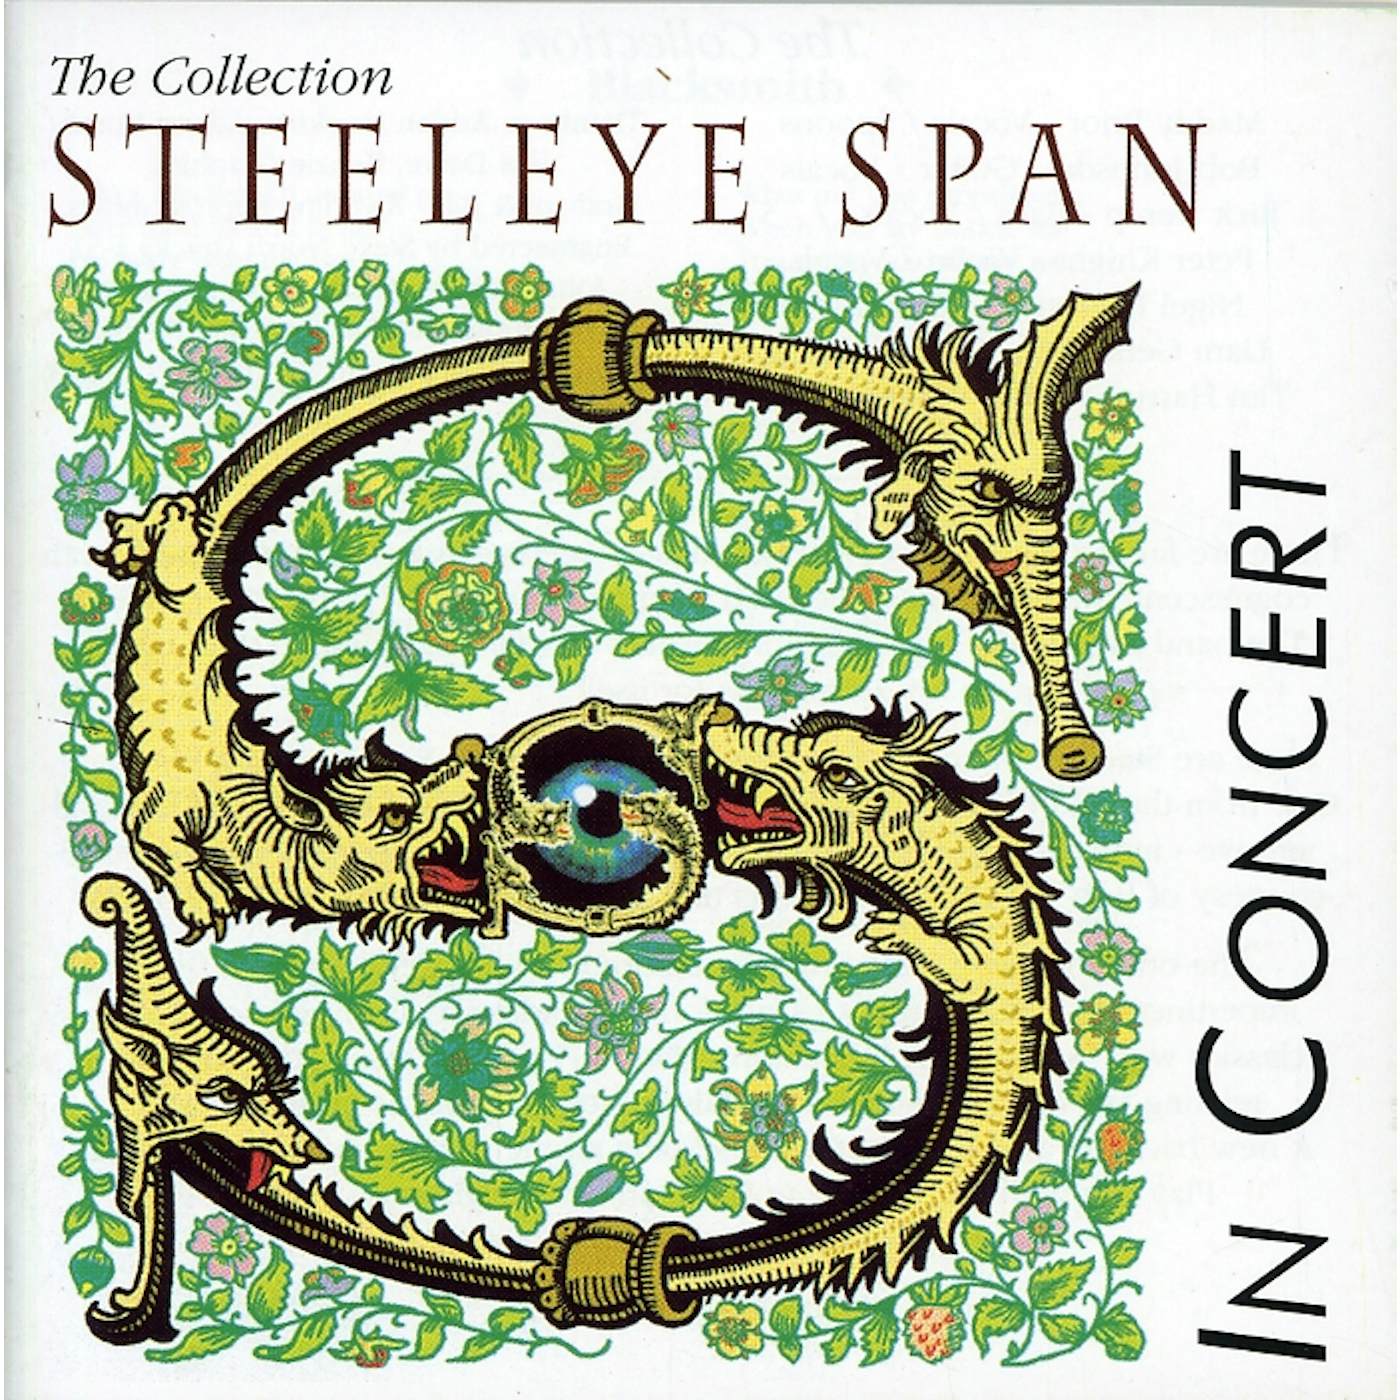 COLLECTION STEELEYE SPAN IN CONCERT CD